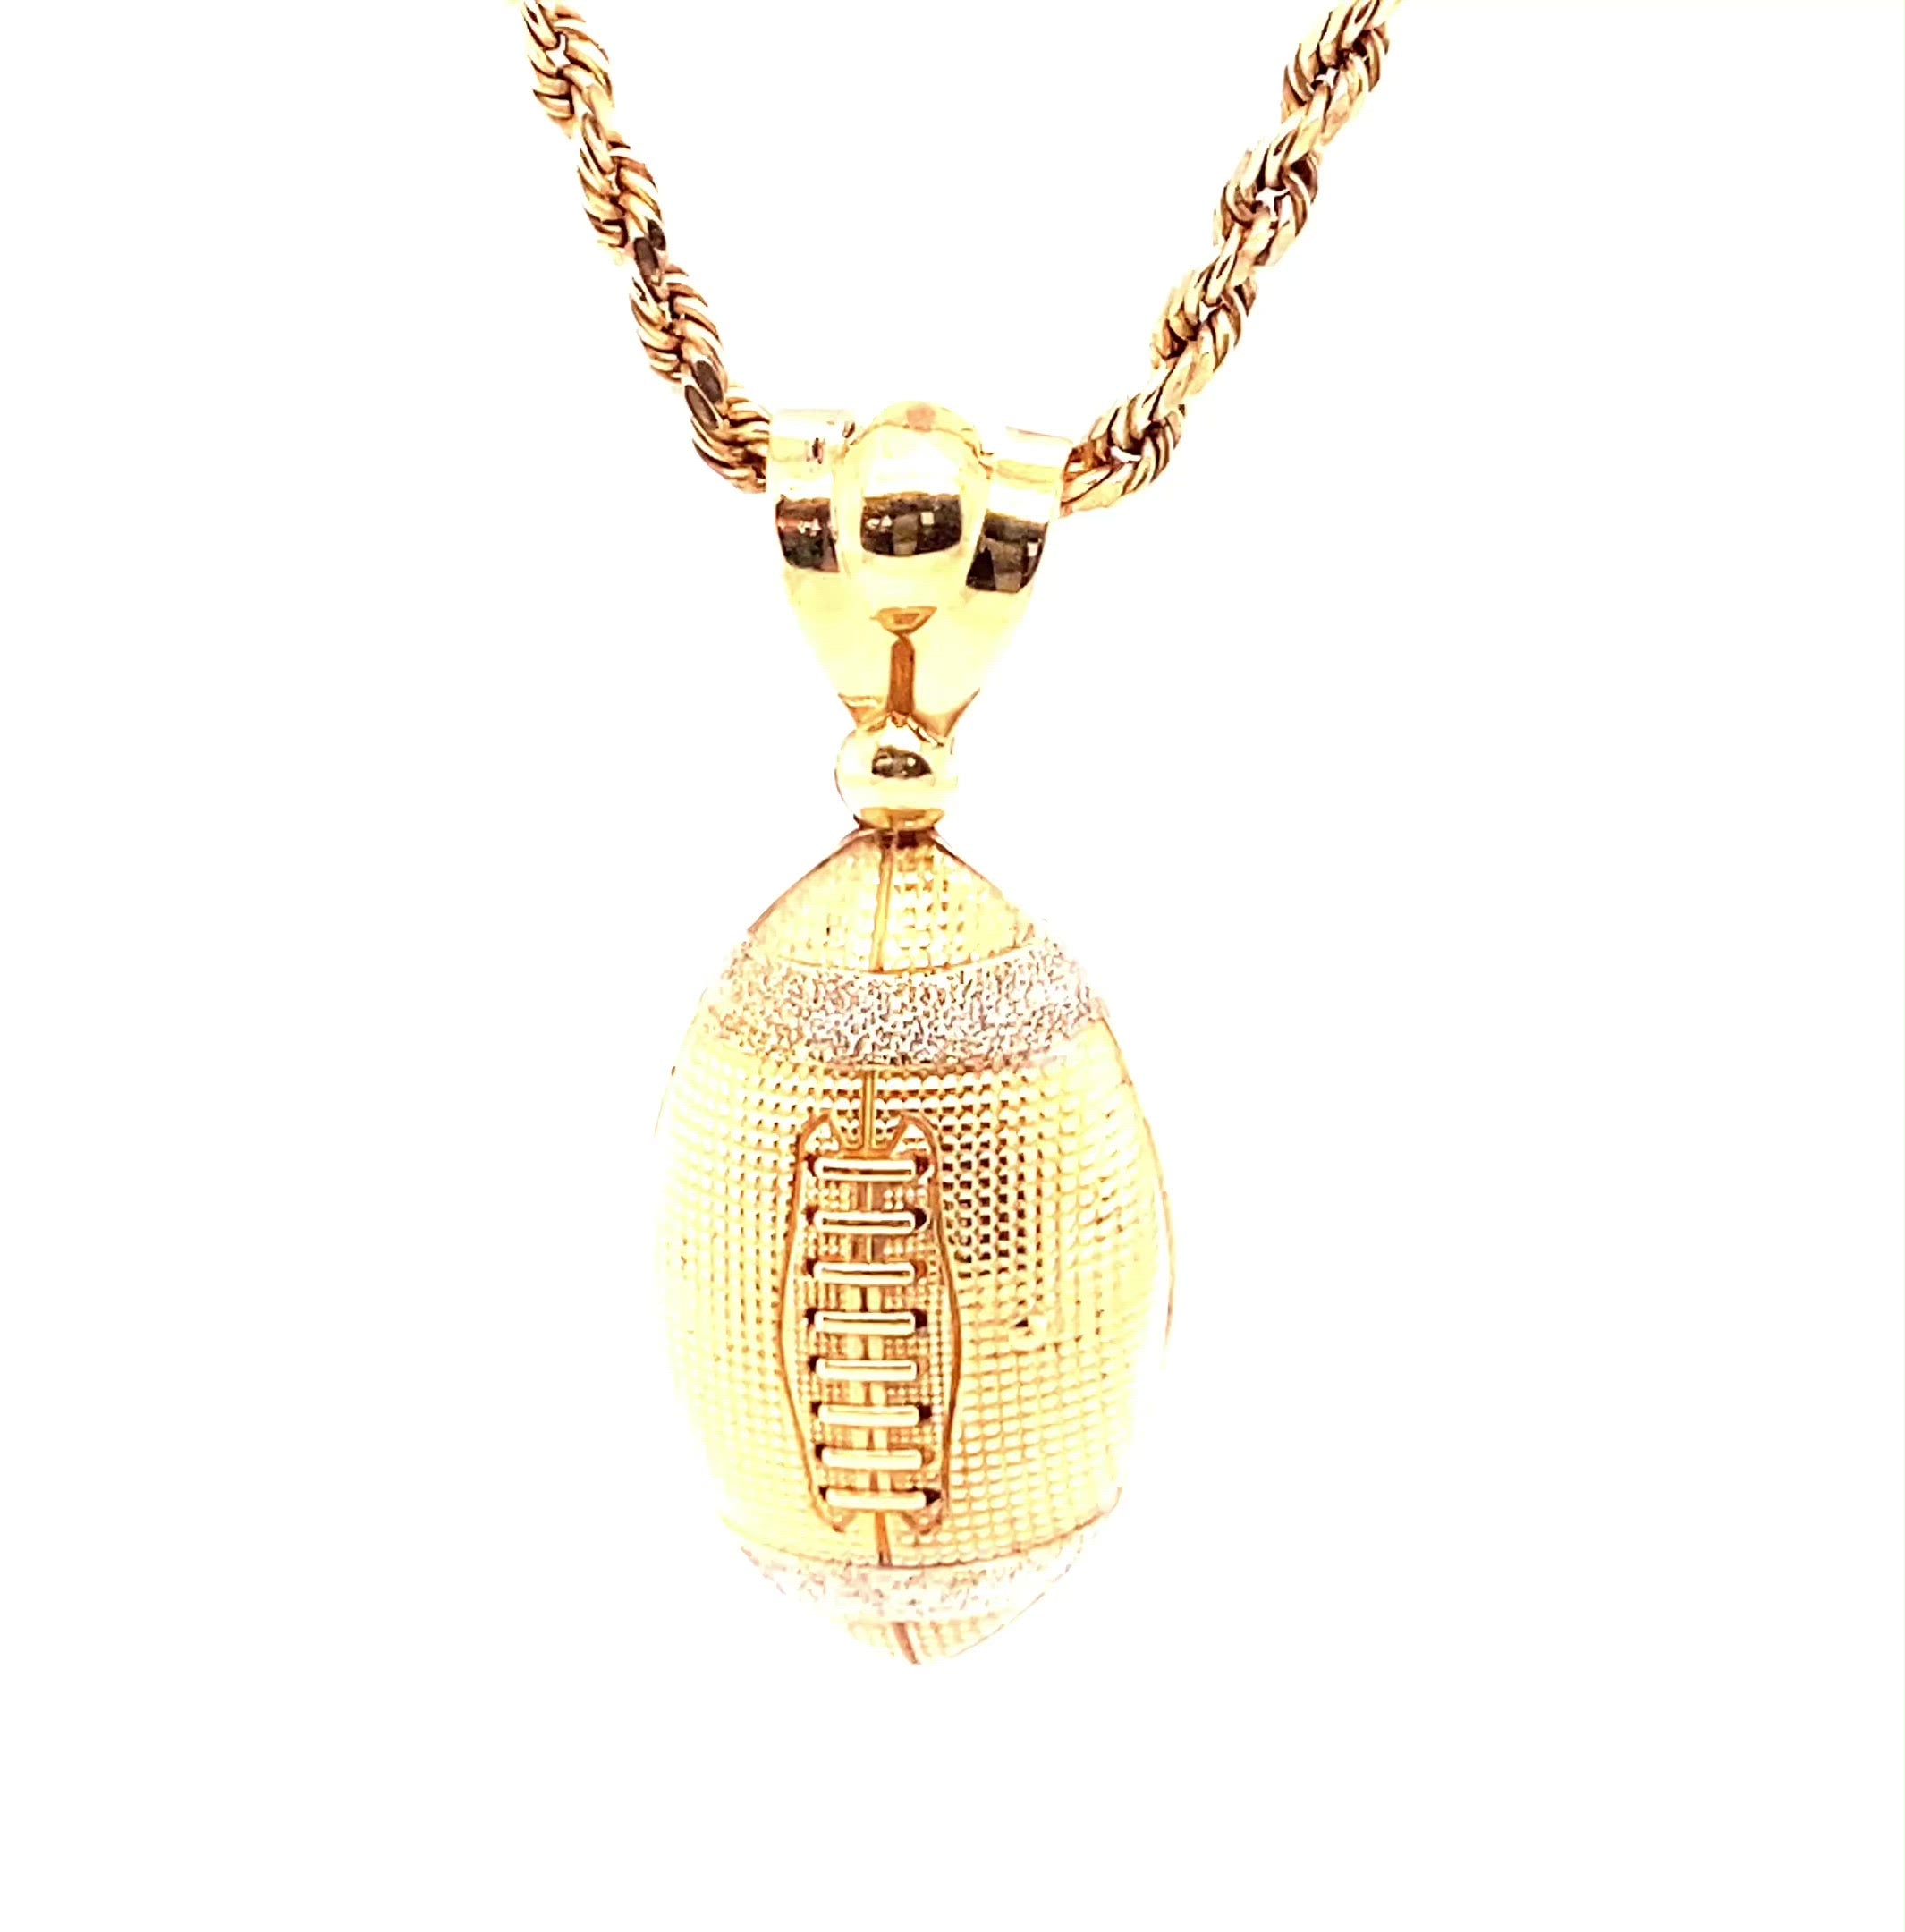 Football Necklace 10K Solid Gold Football Pendant Diamond Illusion Pendant Necklace Statement Necklace Sports Necklace Fine Jewelry Estate